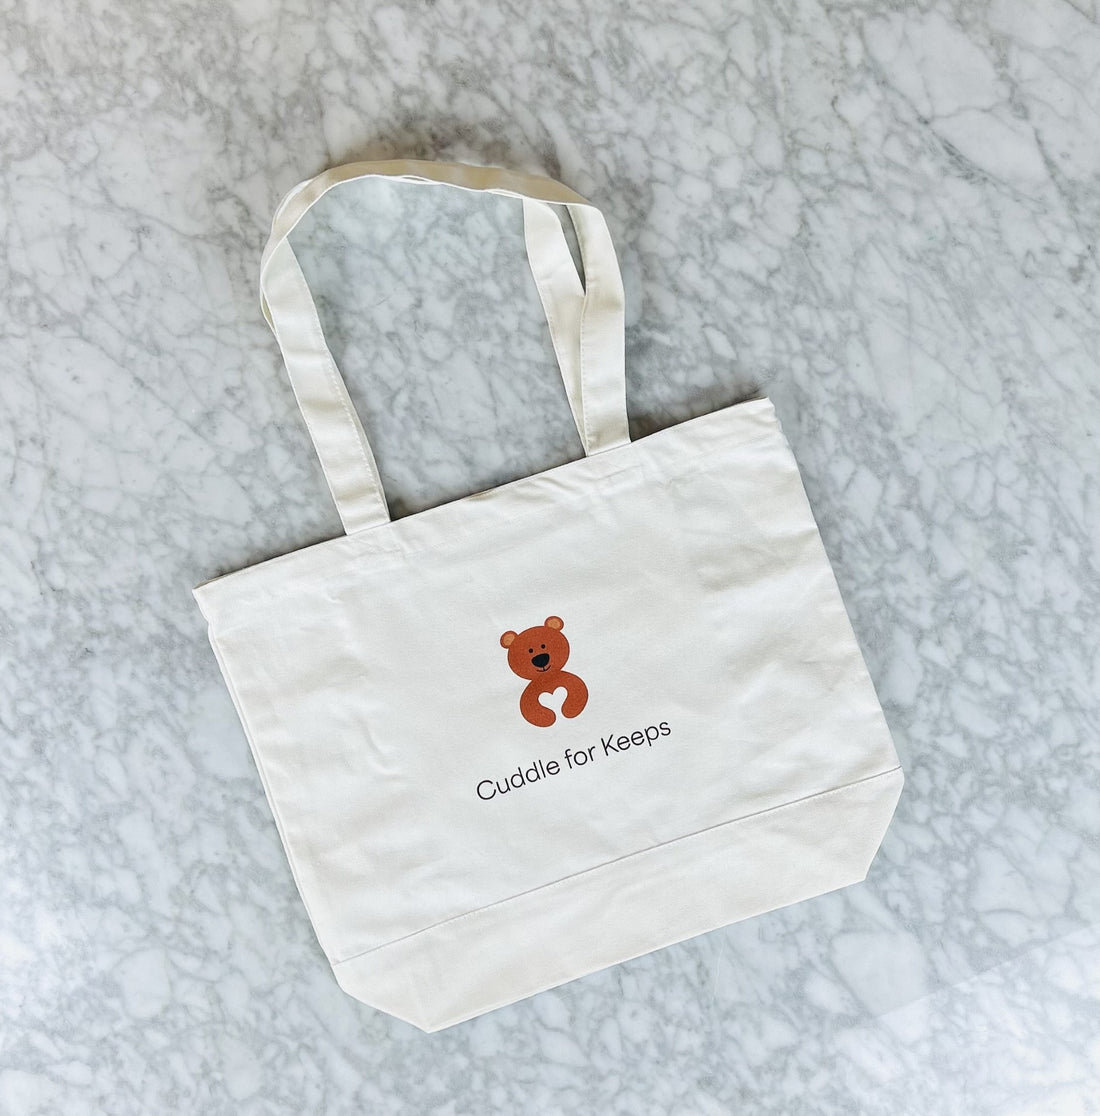 Cuddle for Keeps tote bag.